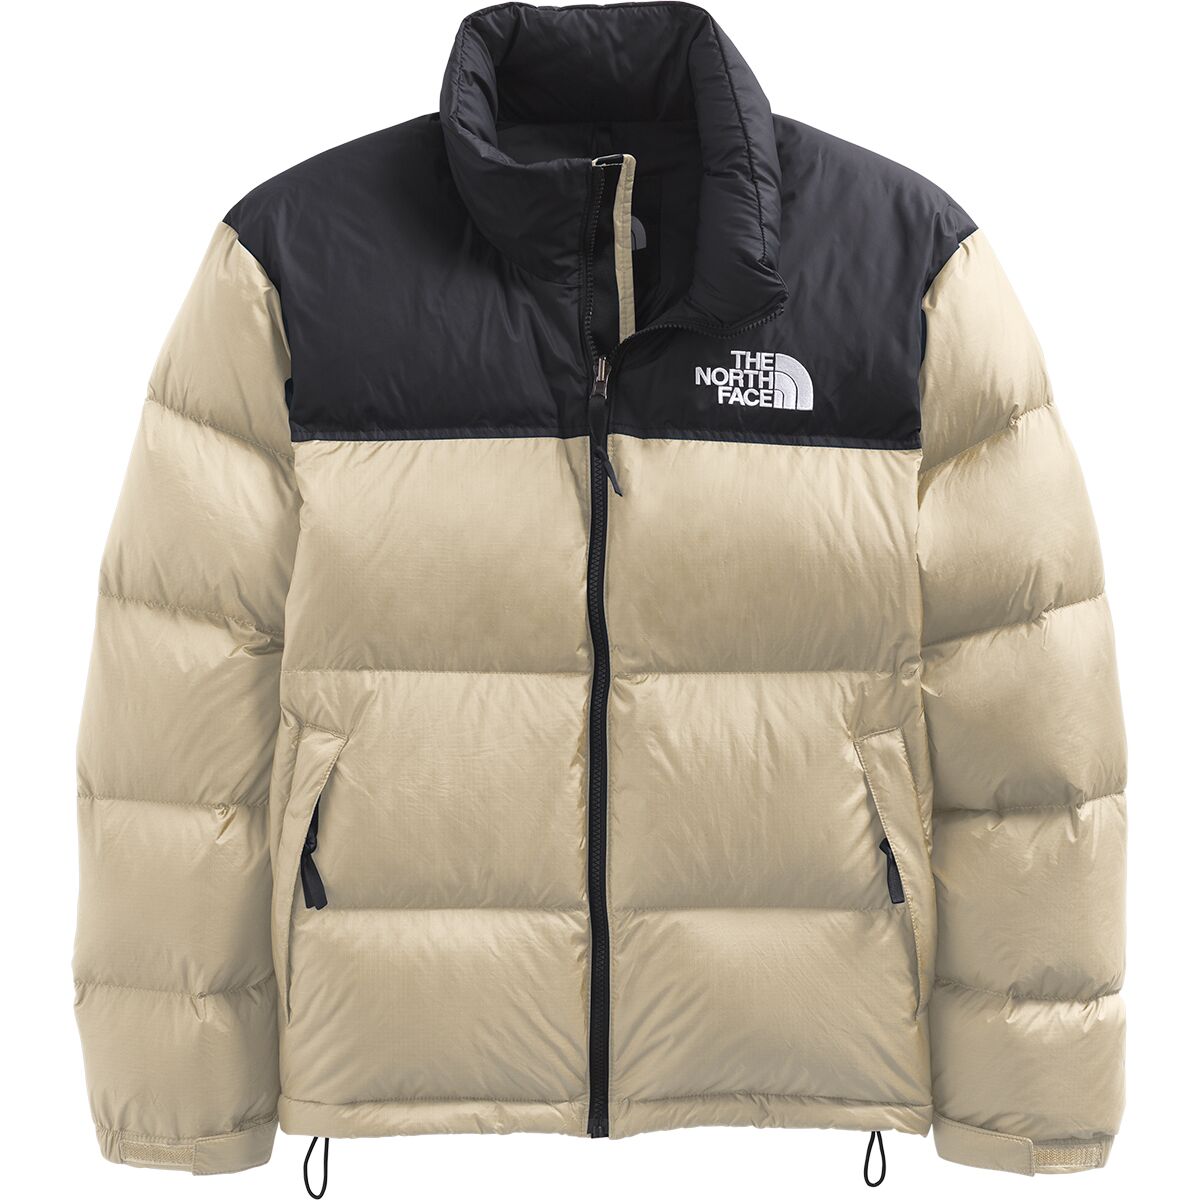 The North Face 北面 1996 男款羽绒服 7色可选